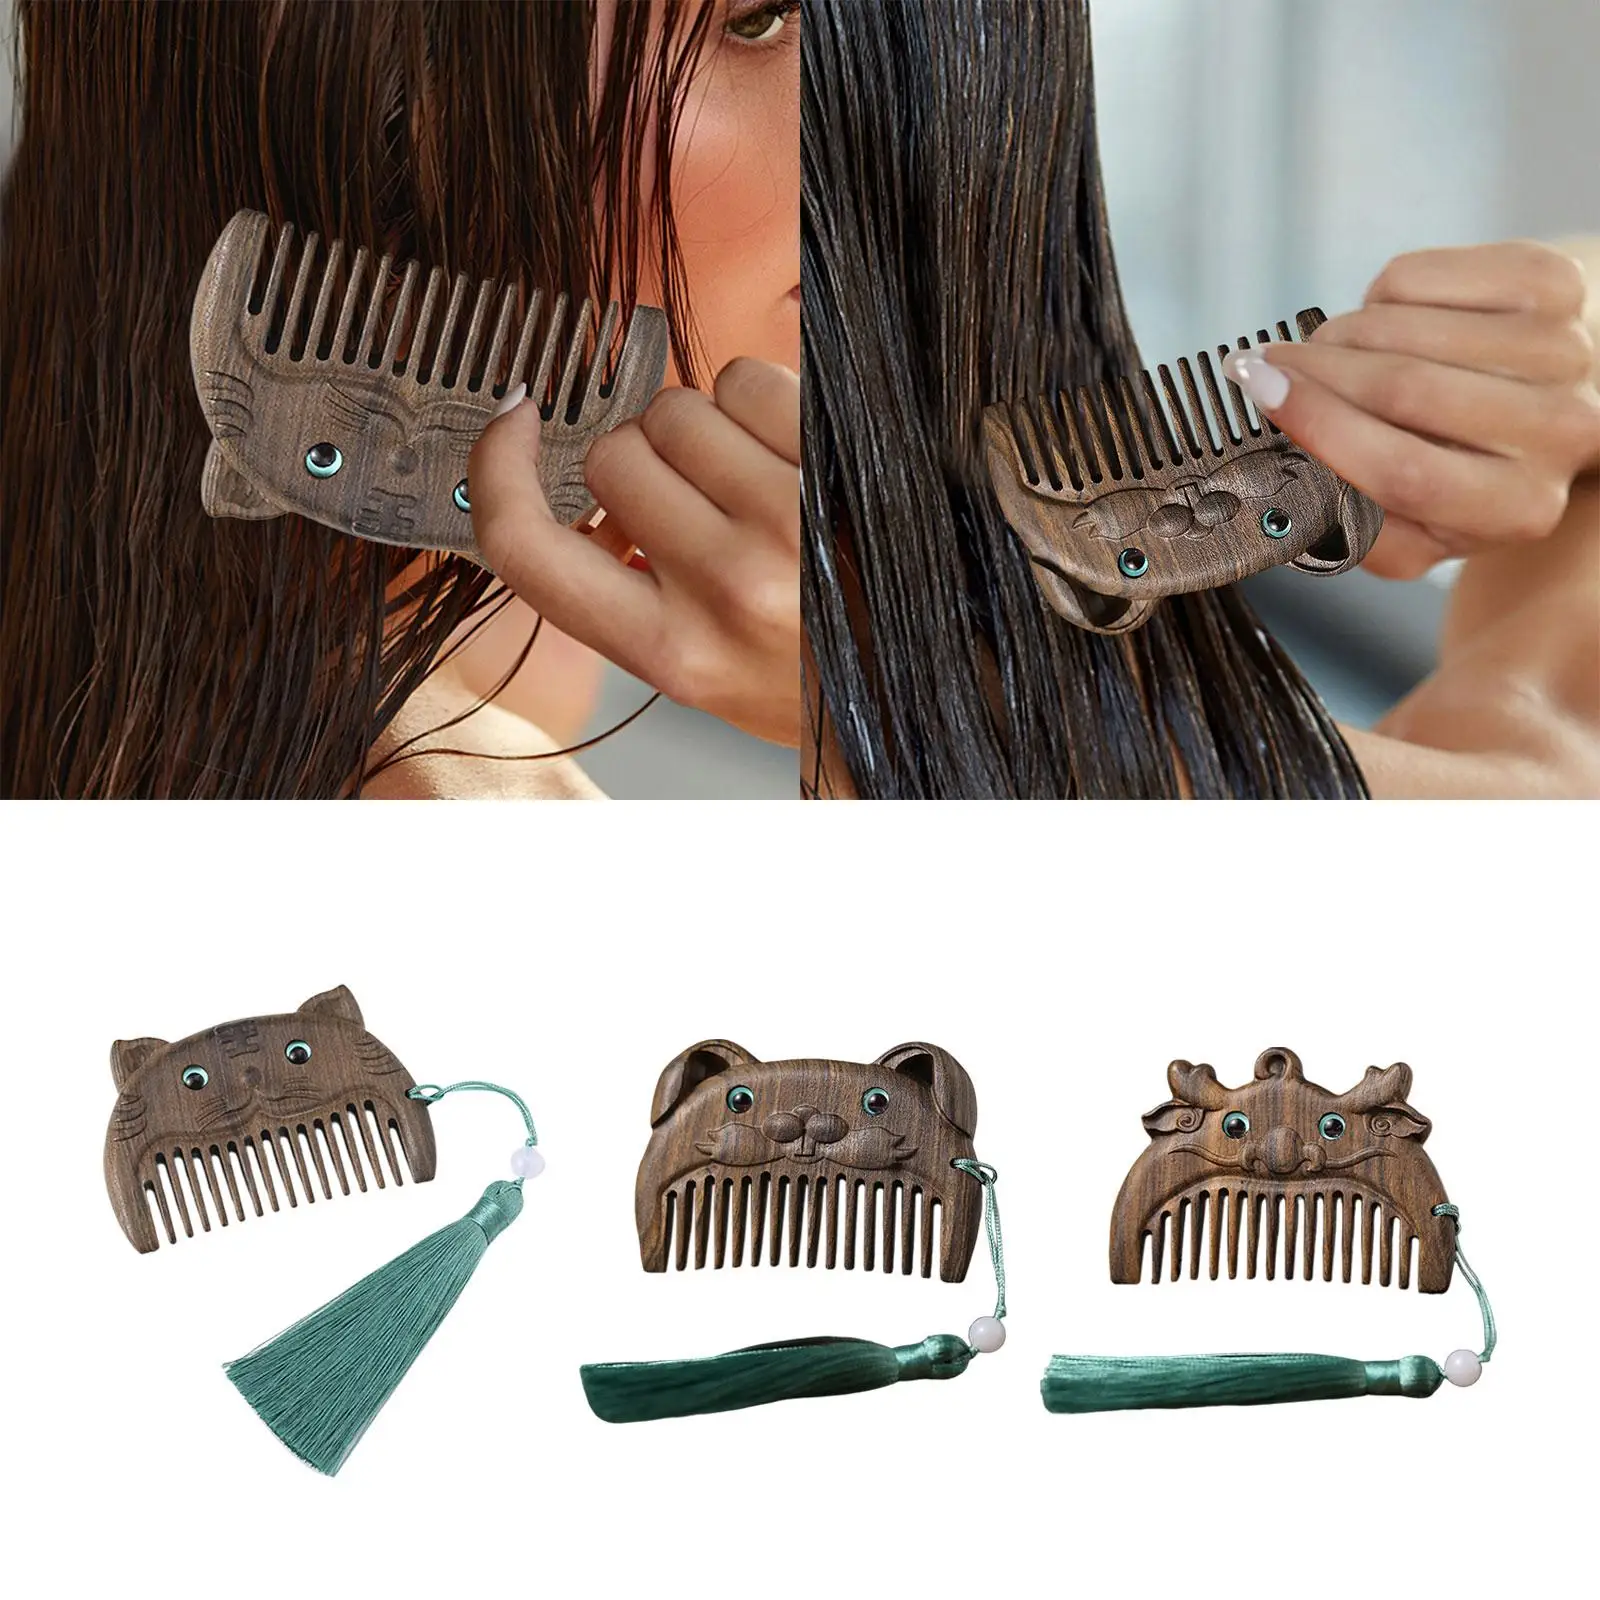 Wooden mini hair combs Cute Comb Pocket Size Handmade with Pendant Tassel Hair Combs Short Hair Comb for Women Mom Grandma Gift